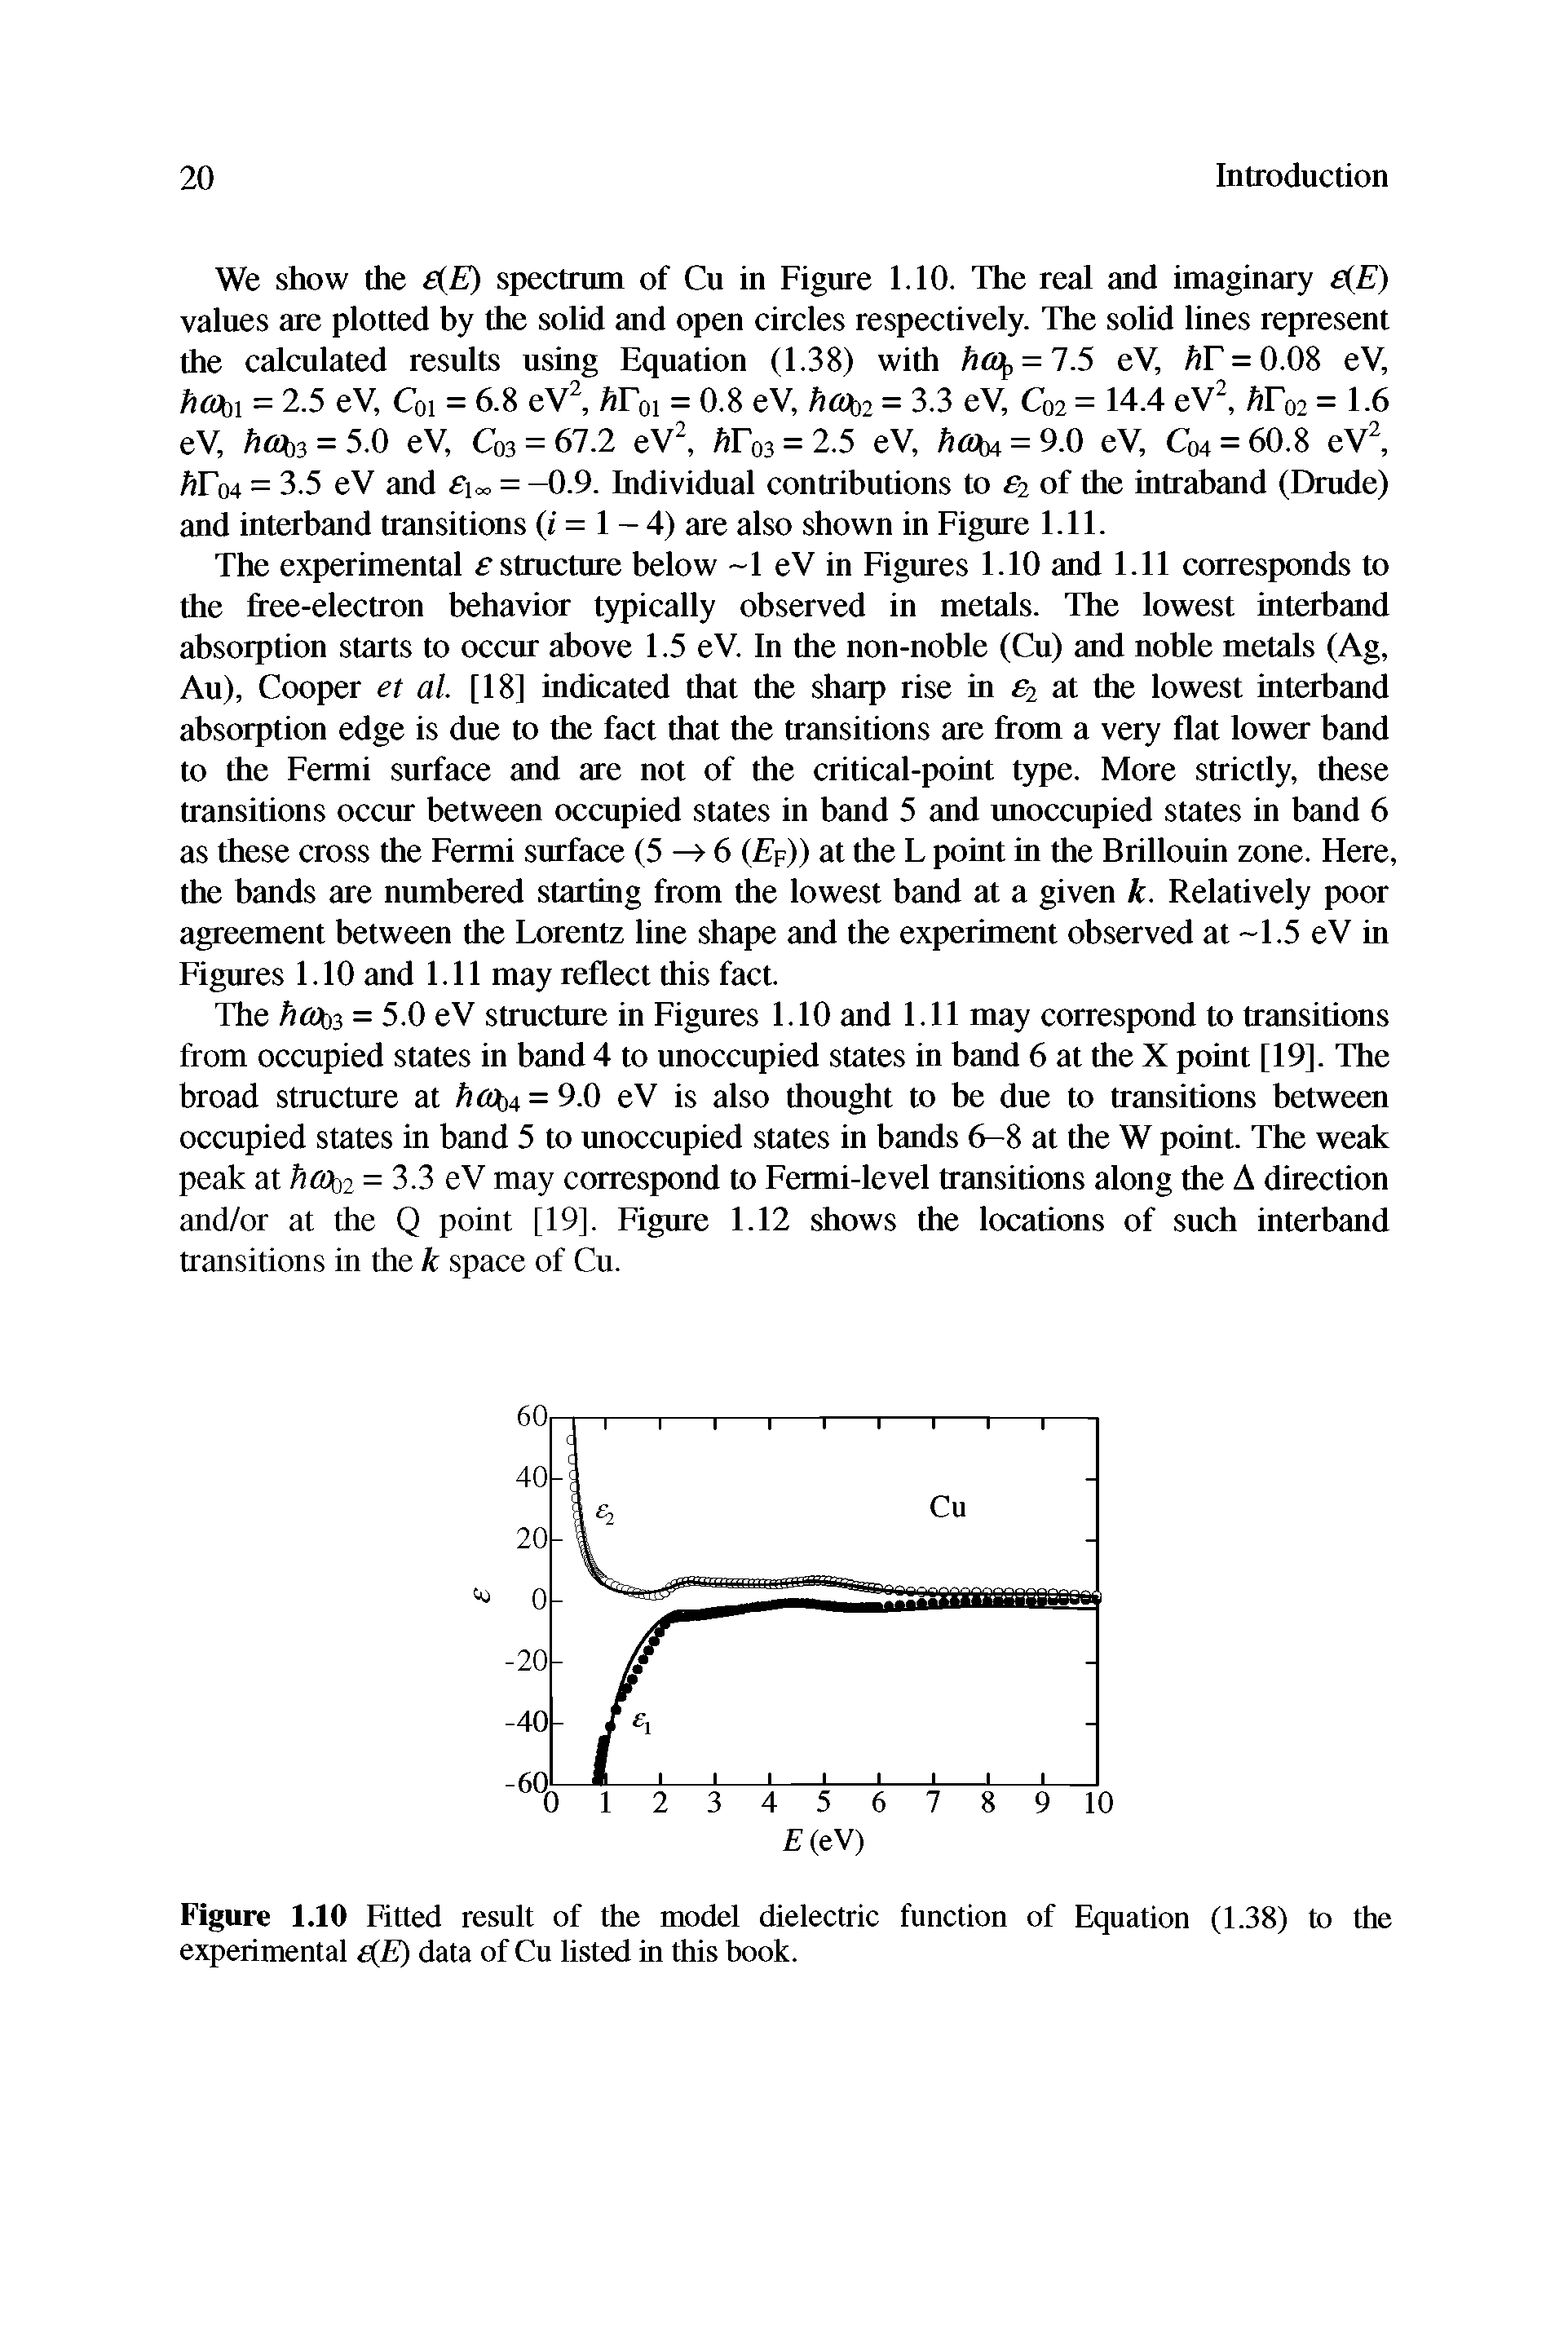 Figure 1.10 Fitted result of the model dielectric function of Equation (1.38) to the experimental e(E) data of Cu listed in this book.